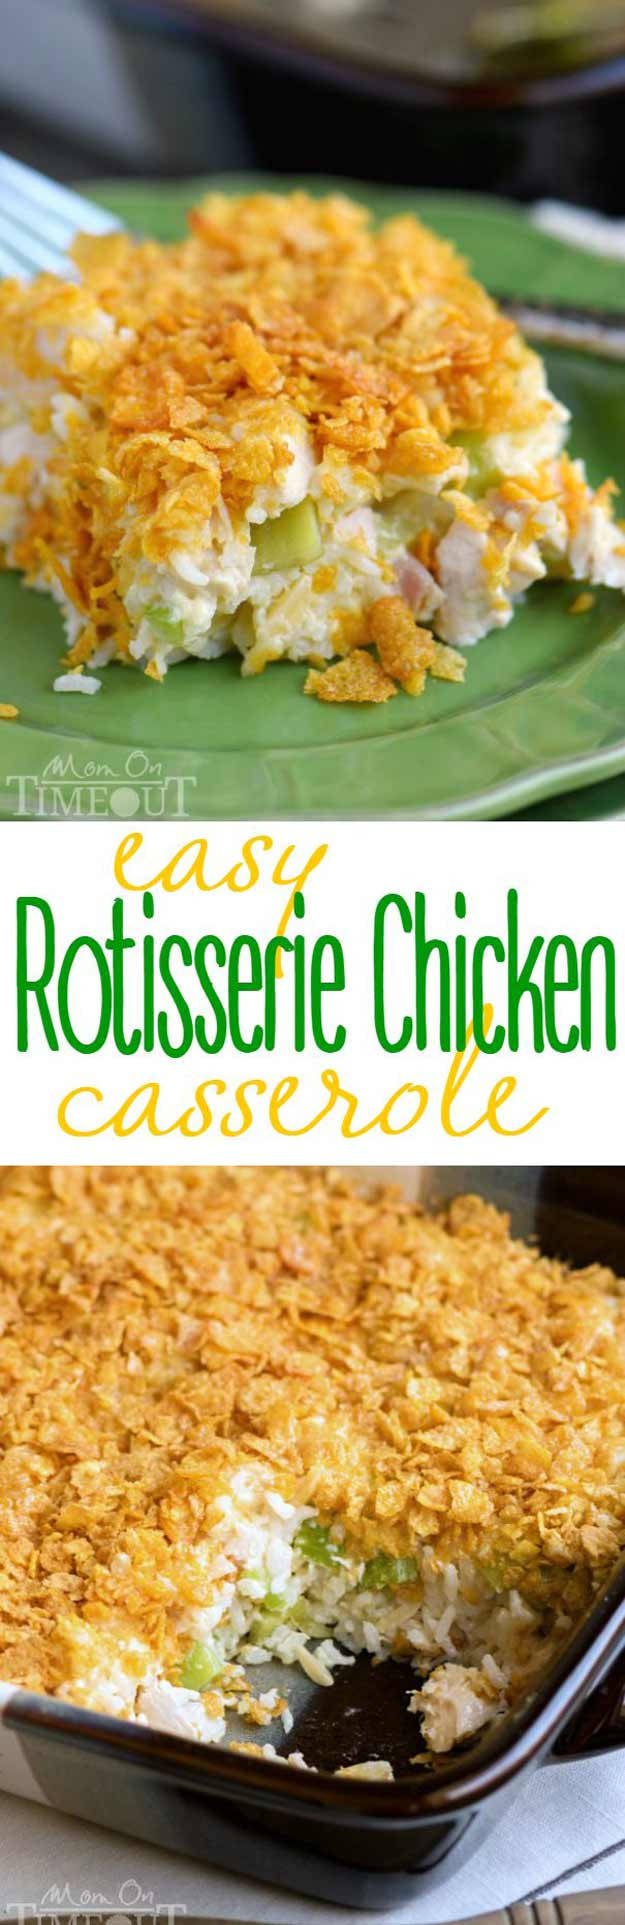 Healthy Rotisserie Chicken Casserole
 15 Chicken Casserole Recipes Perfect For The Family